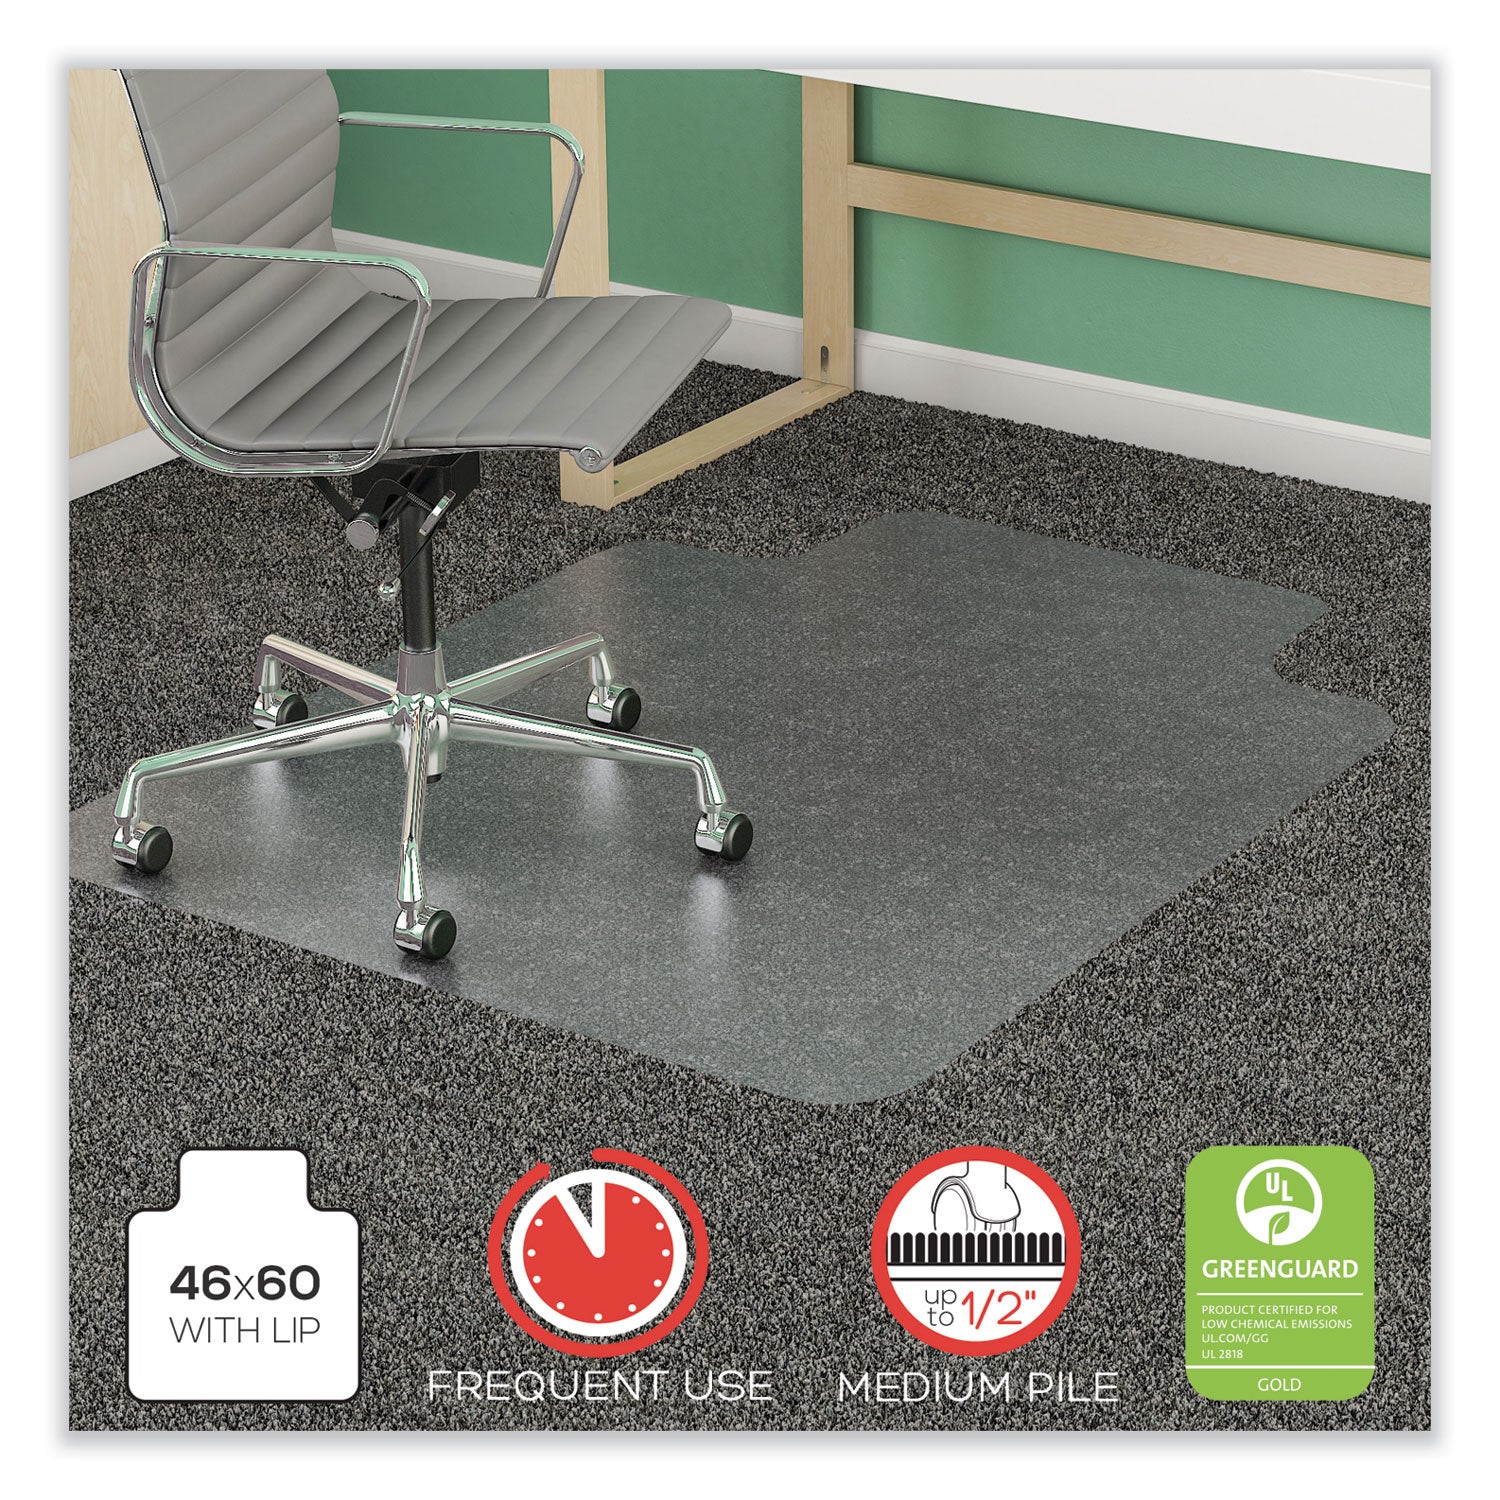 supermat-frequent-use-chair-mat-for-medium-pile-carpet-46-x-60-wide-lipped-clear_defcm14432f - 1